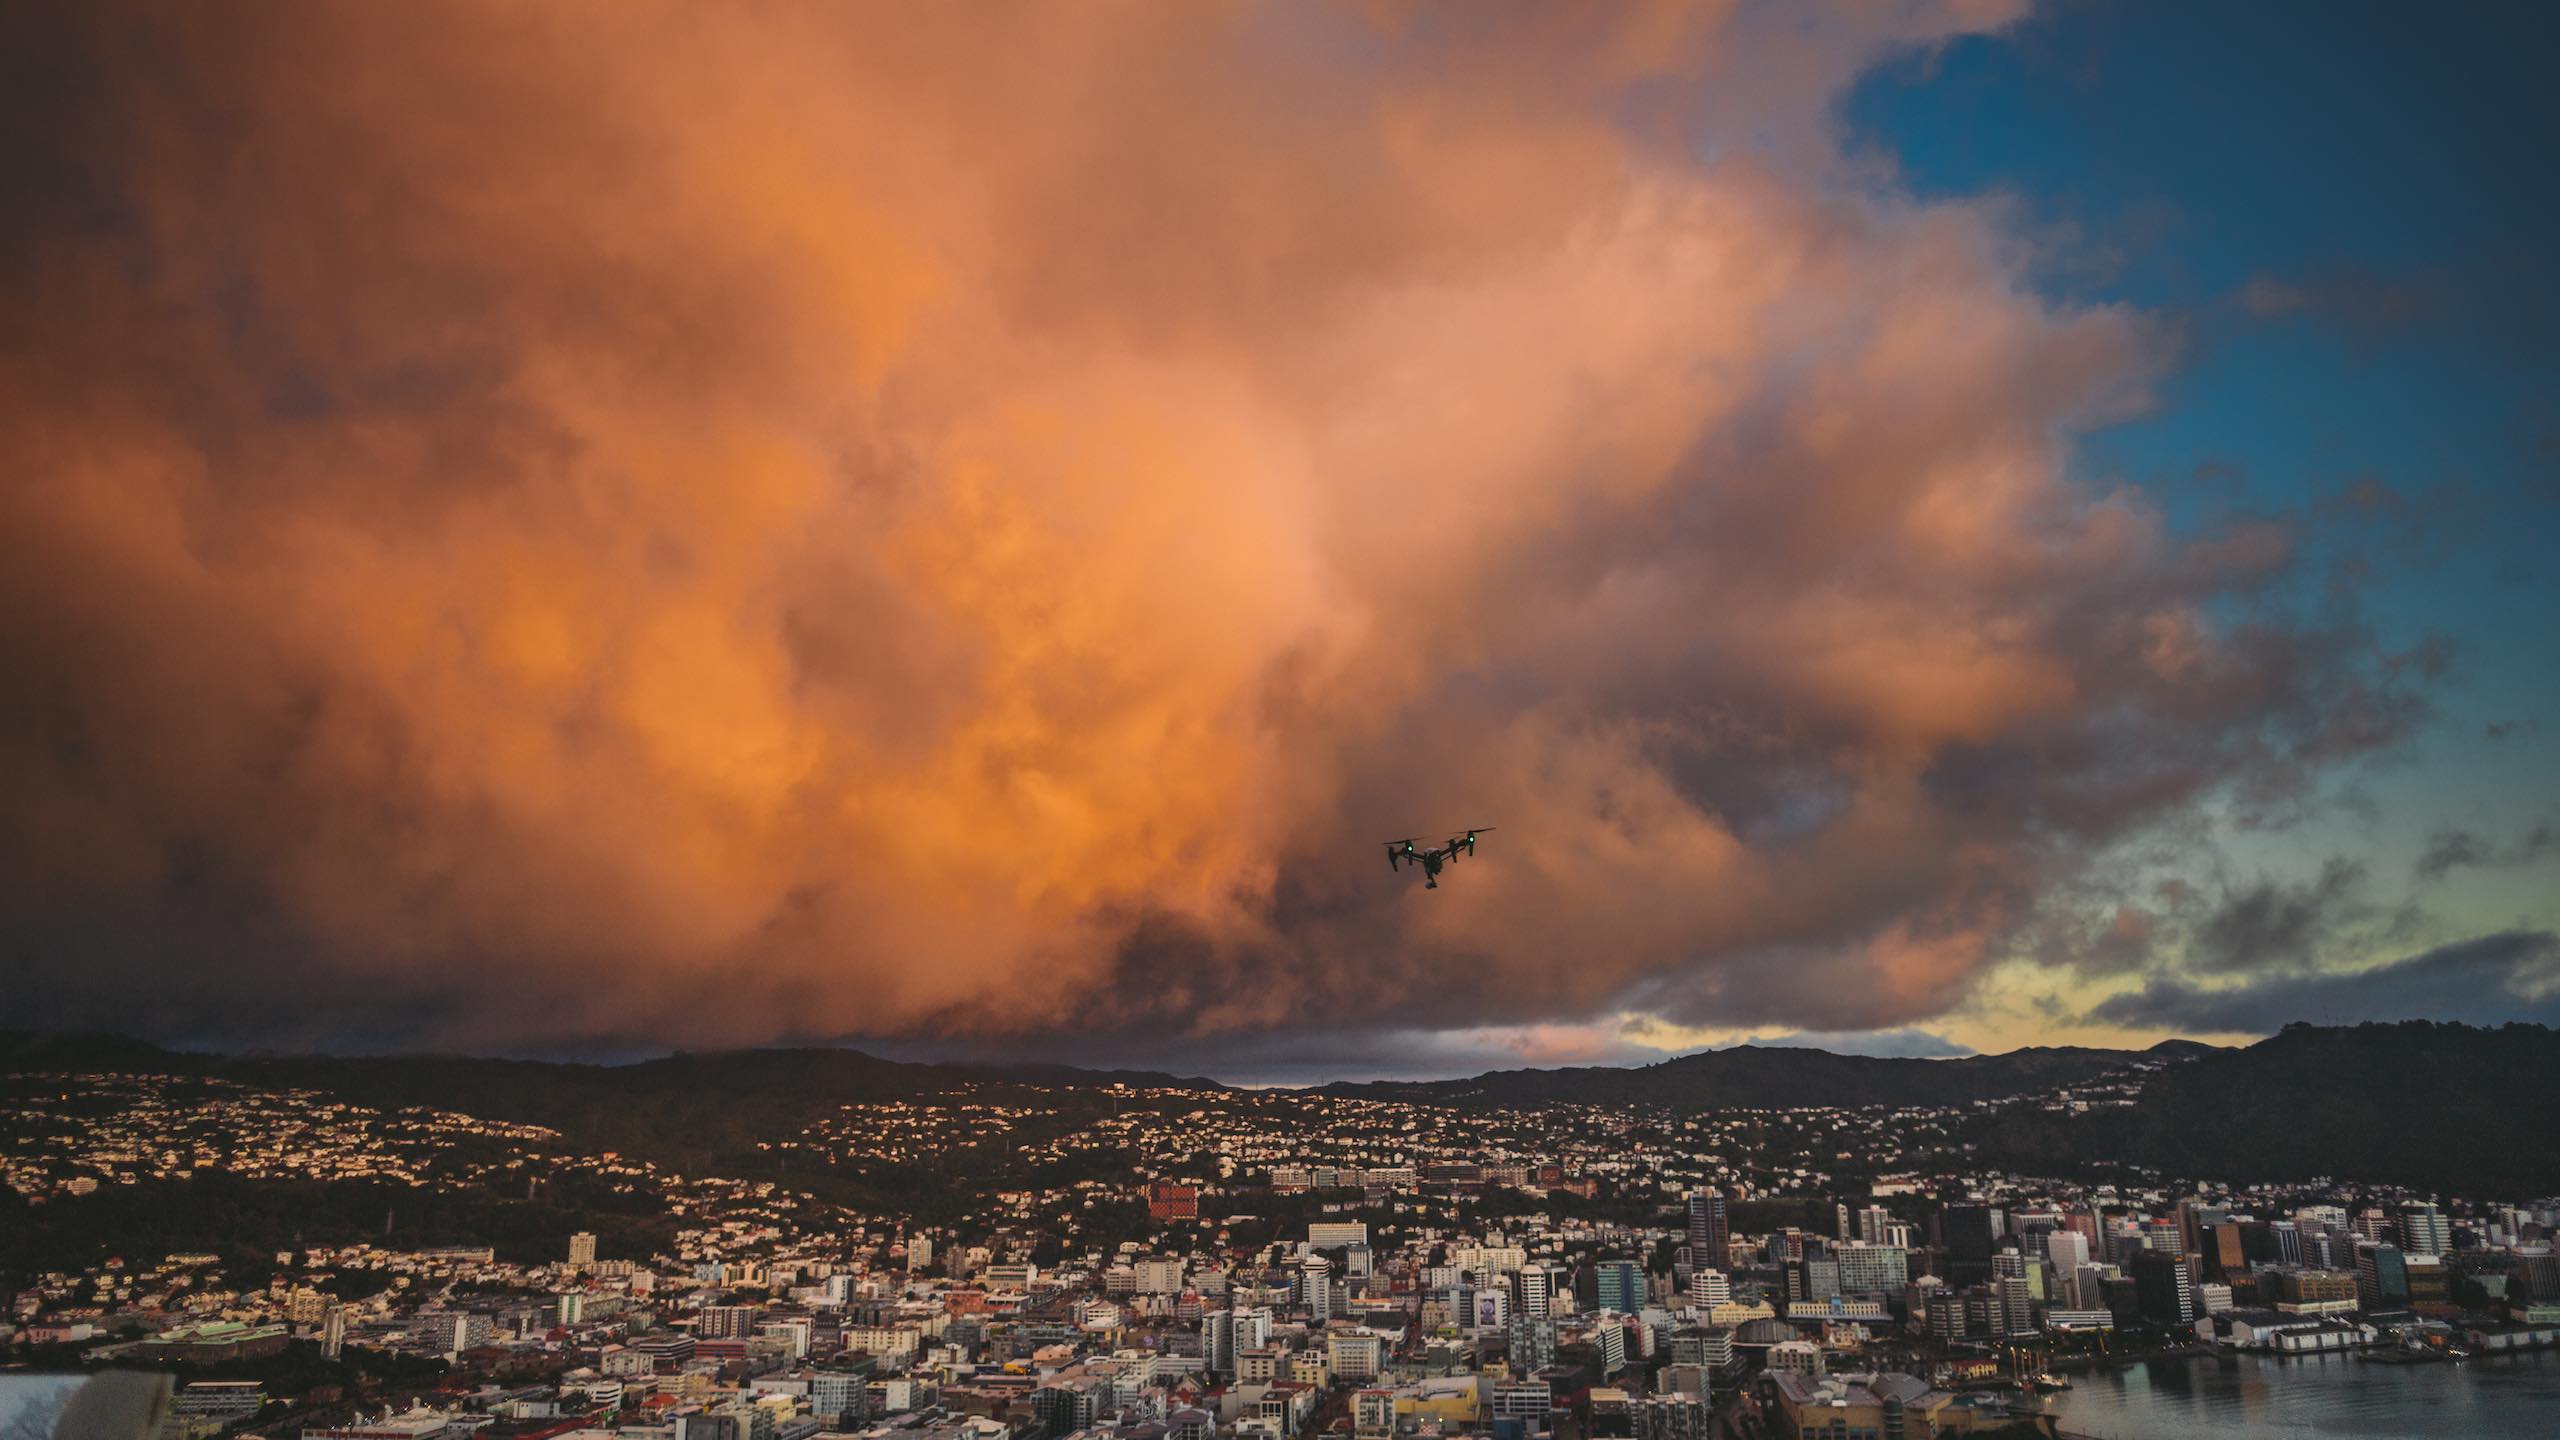 Magic Leap LA Video Production with view of a drone flying over a city with reddish orange cloud in the background